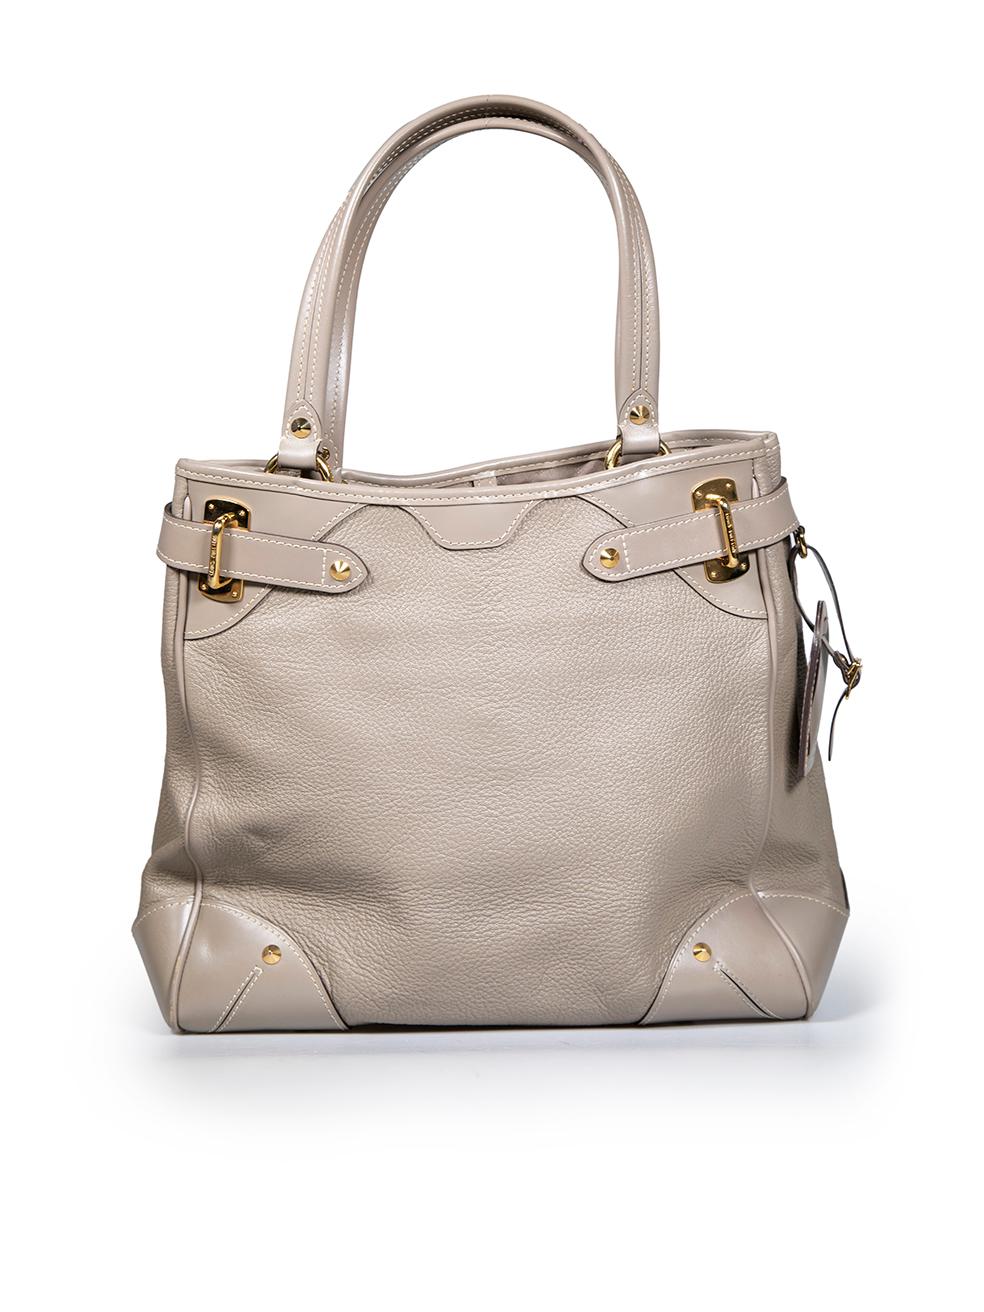 Louis Vuitton 2008 Taupe Leather Le Majestueux Suhali Shopping Tote In Good Condition For Sale In London, GB